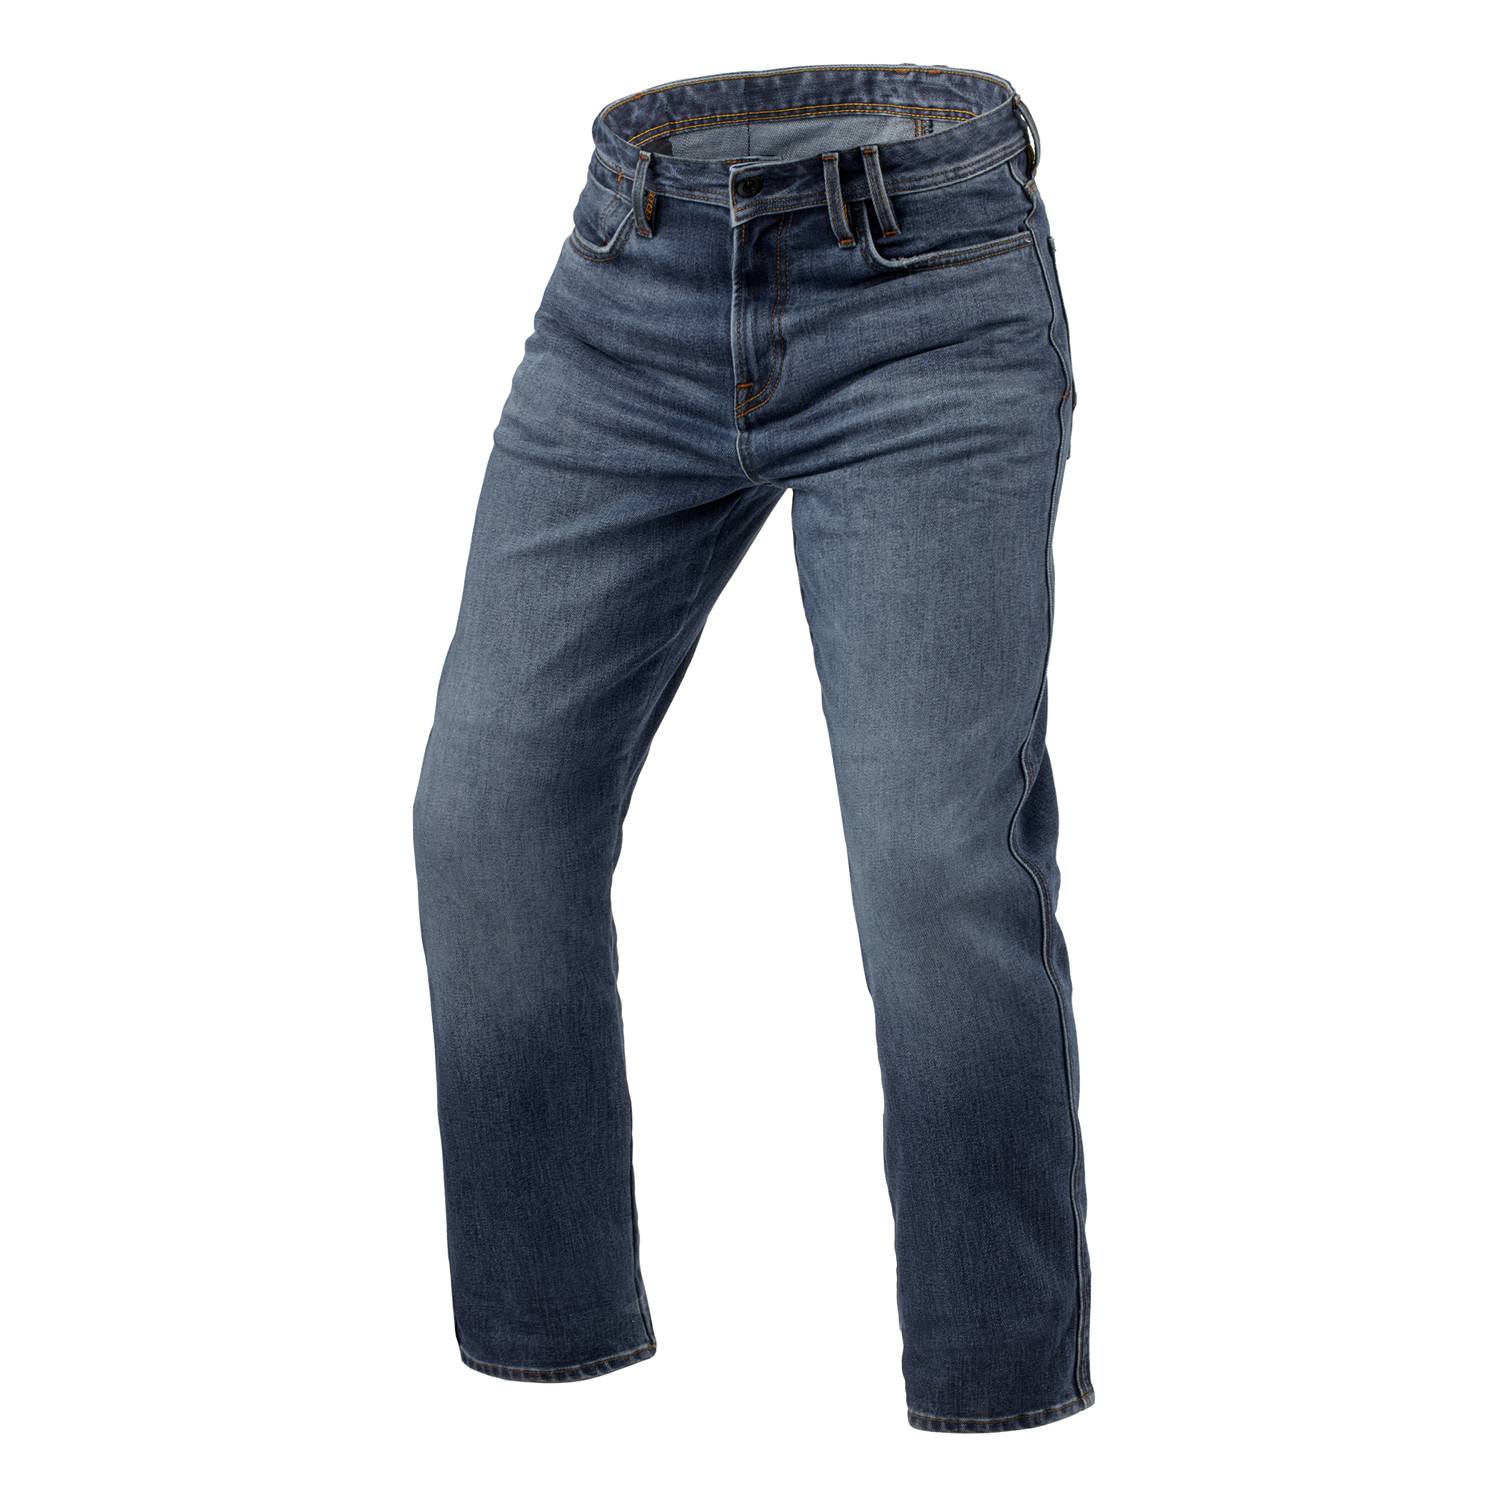 Image of REV'IT! Jeans Lombard 3 RF Medium Blue Stone L36 Motorcycle Jeans Taille L36/W32